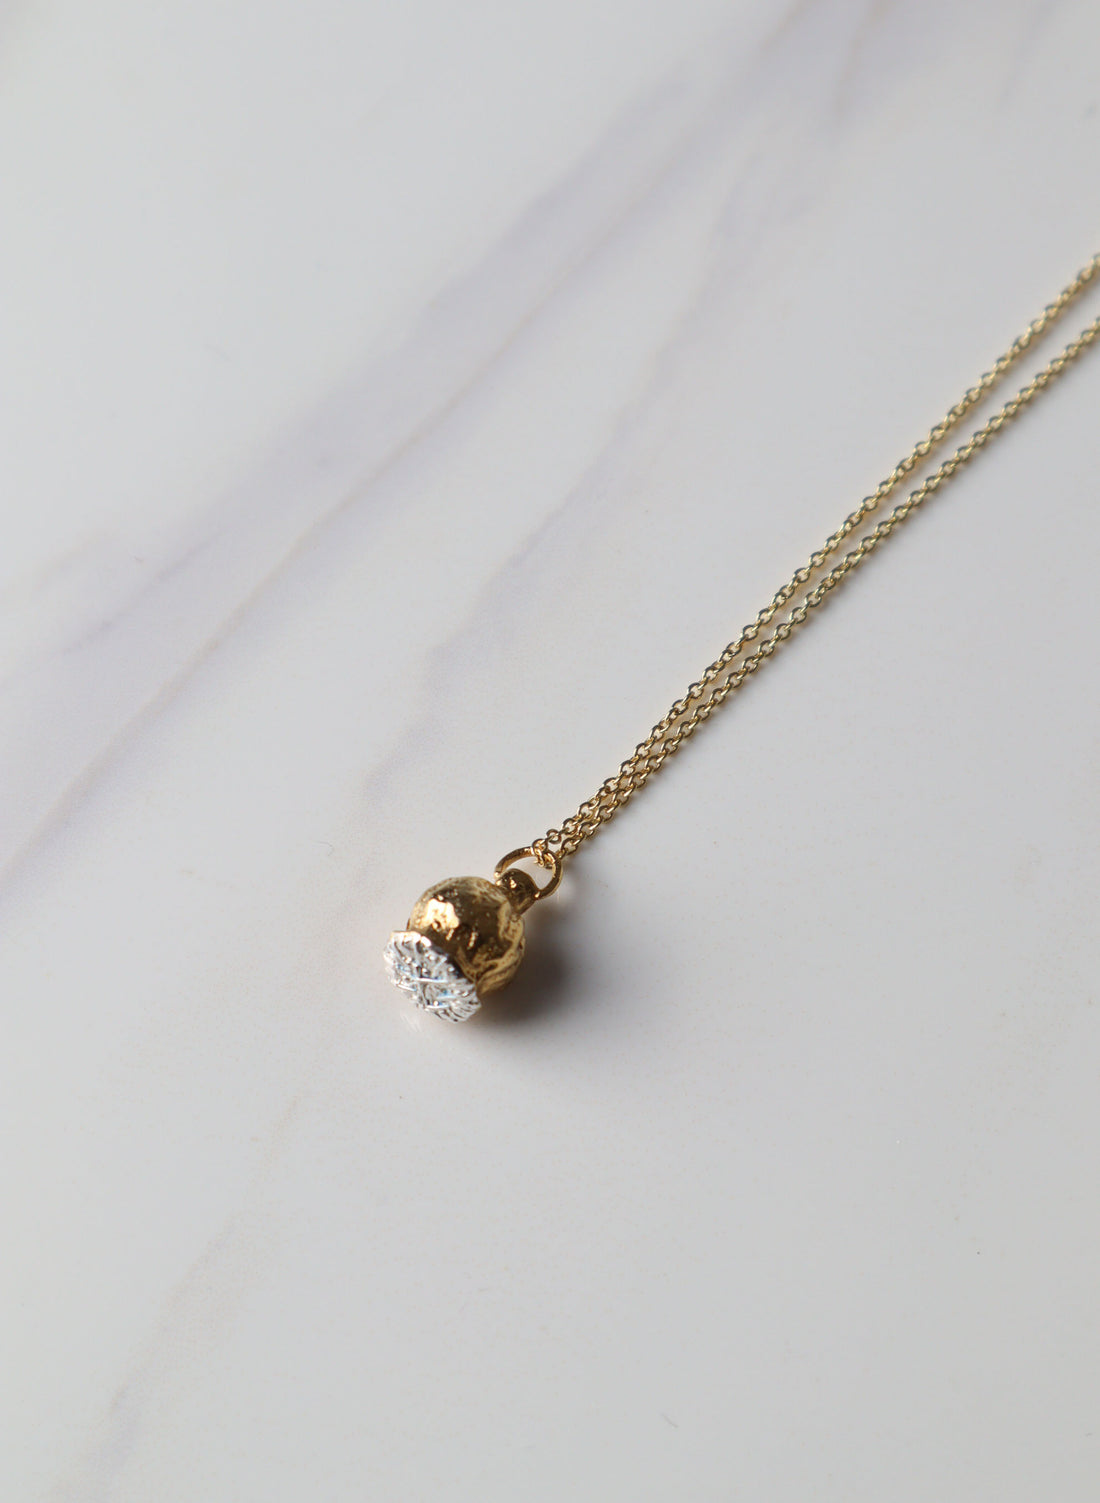 ANZAC Poppy Necklace - Gold Plate and Stirling Silver